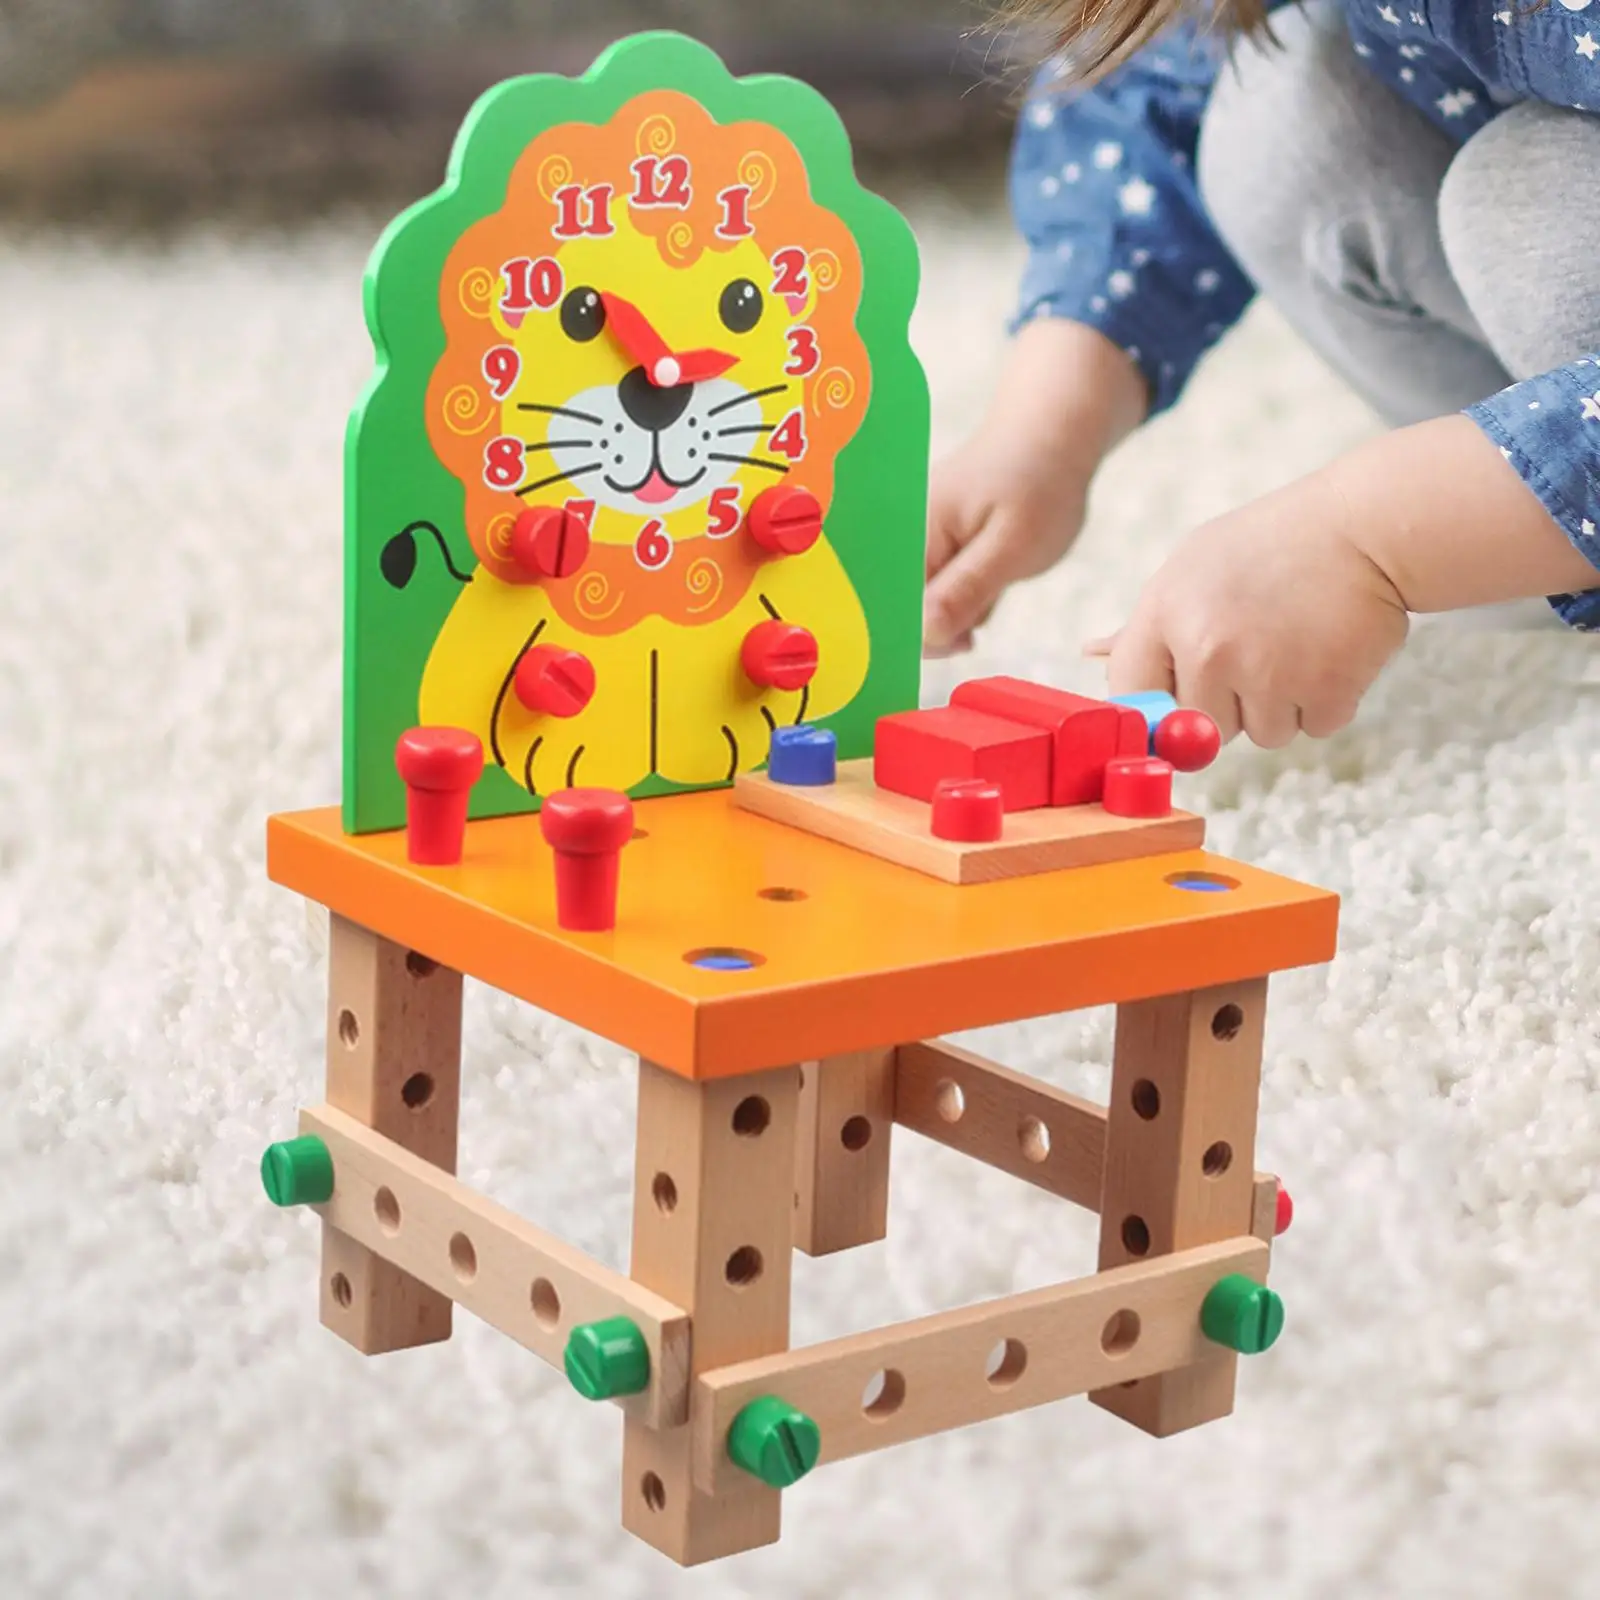 Wooden Assembling Chair Montessori Toys Nuts and Bolts Toy for Children